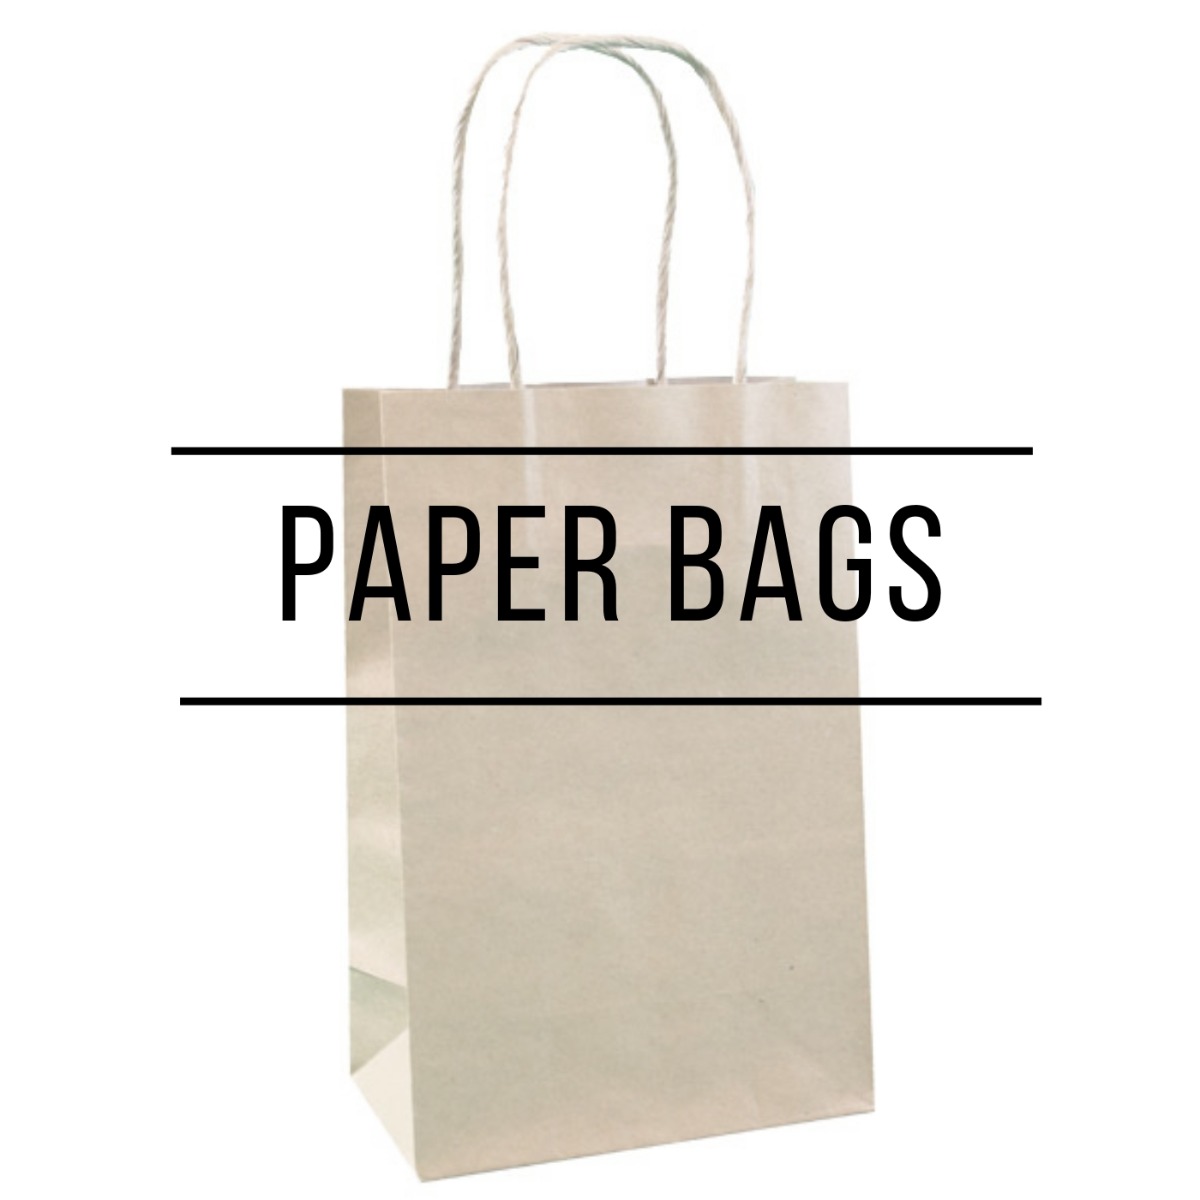 Paper bags in hawaii in multiple solid colors, ranging from Kraft to Laminated European Tote Style Bags.